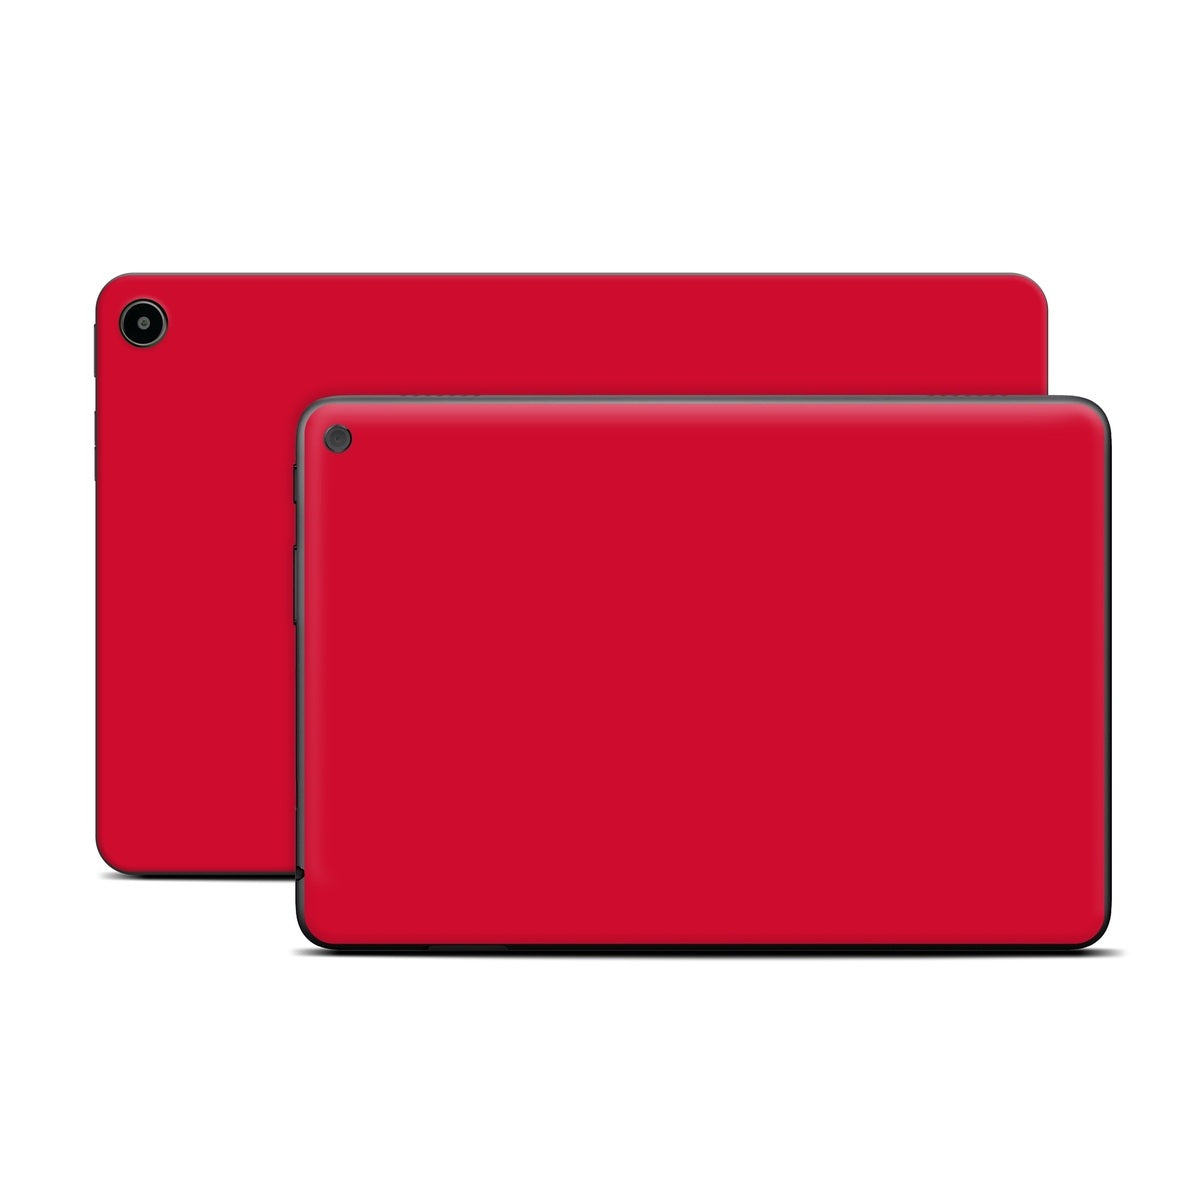 Solid State Red - Amazon Fire Skin